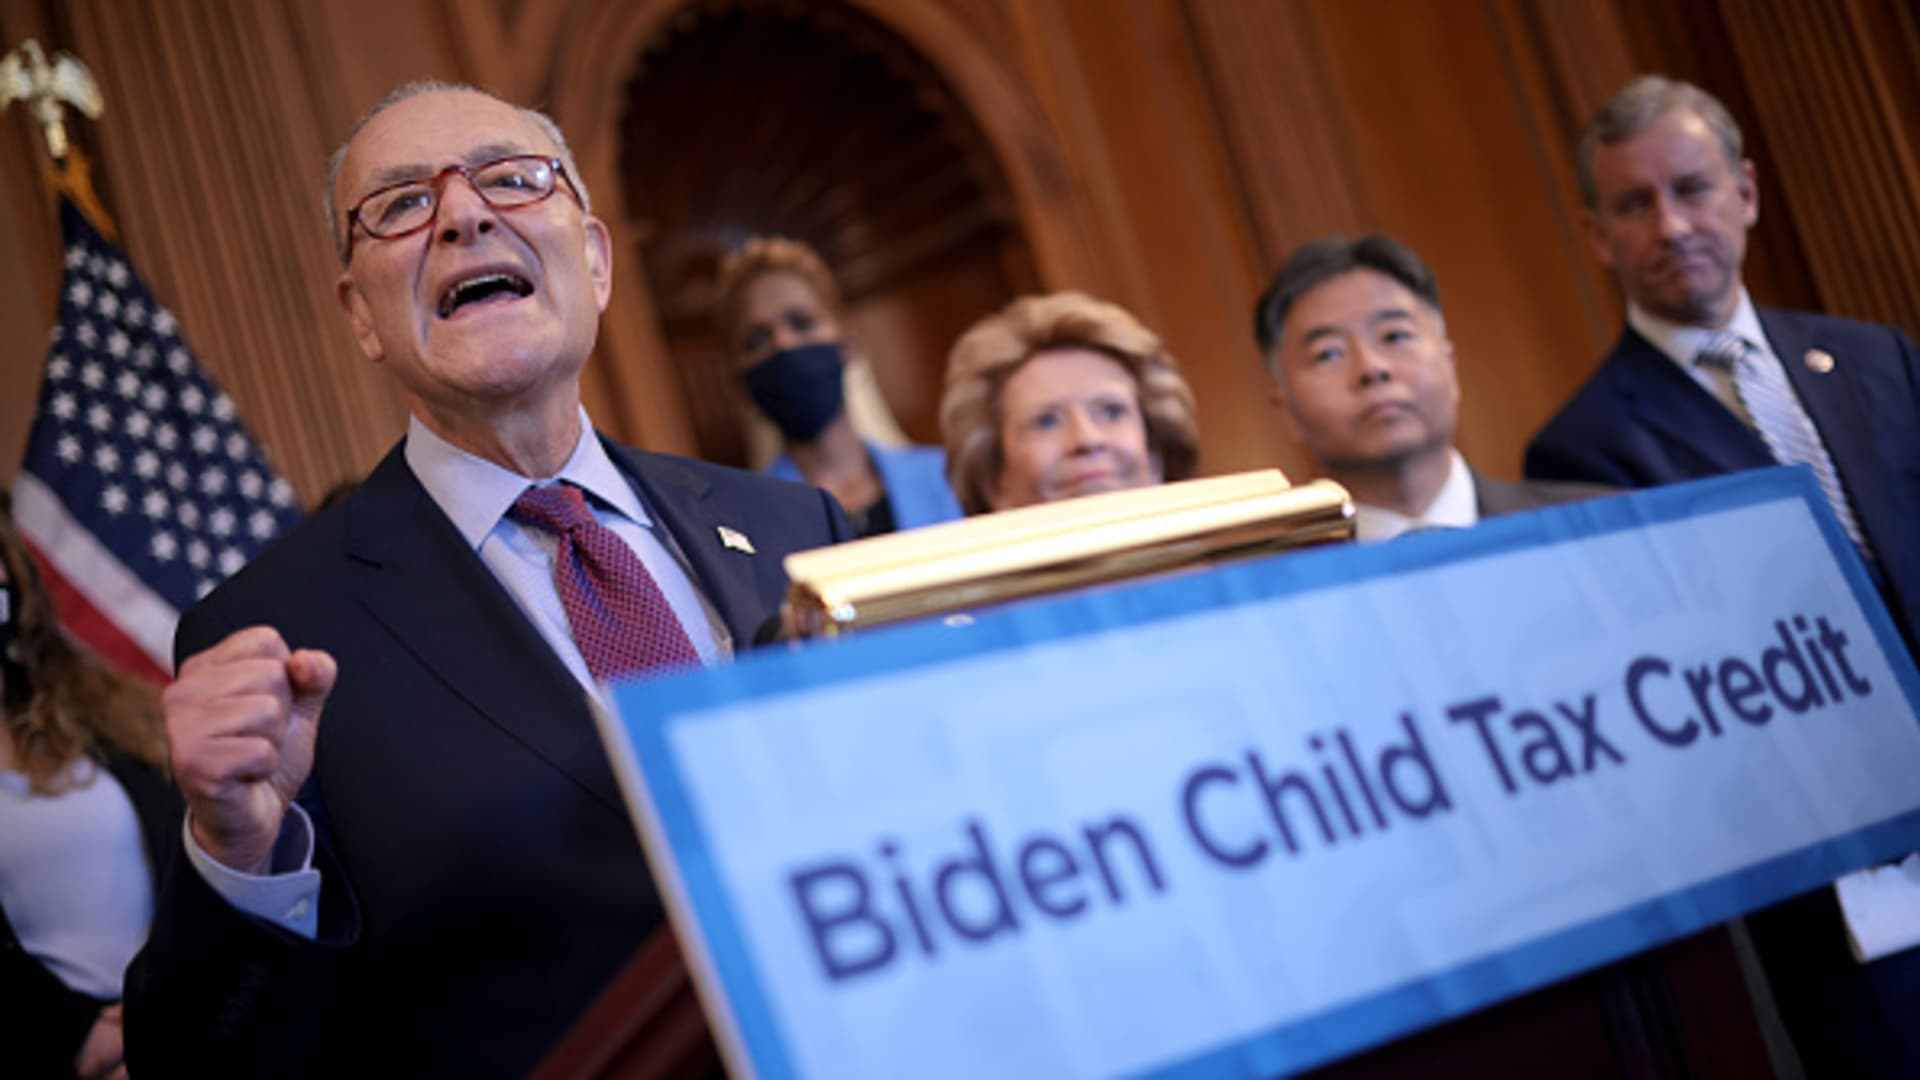 Senate Majority Leader Chuck Schumer (D-NY) speaks during a news conference on families helped by the Child Tax Credit at the U.S. Capitol July 20, 2021 in Washington, DC.